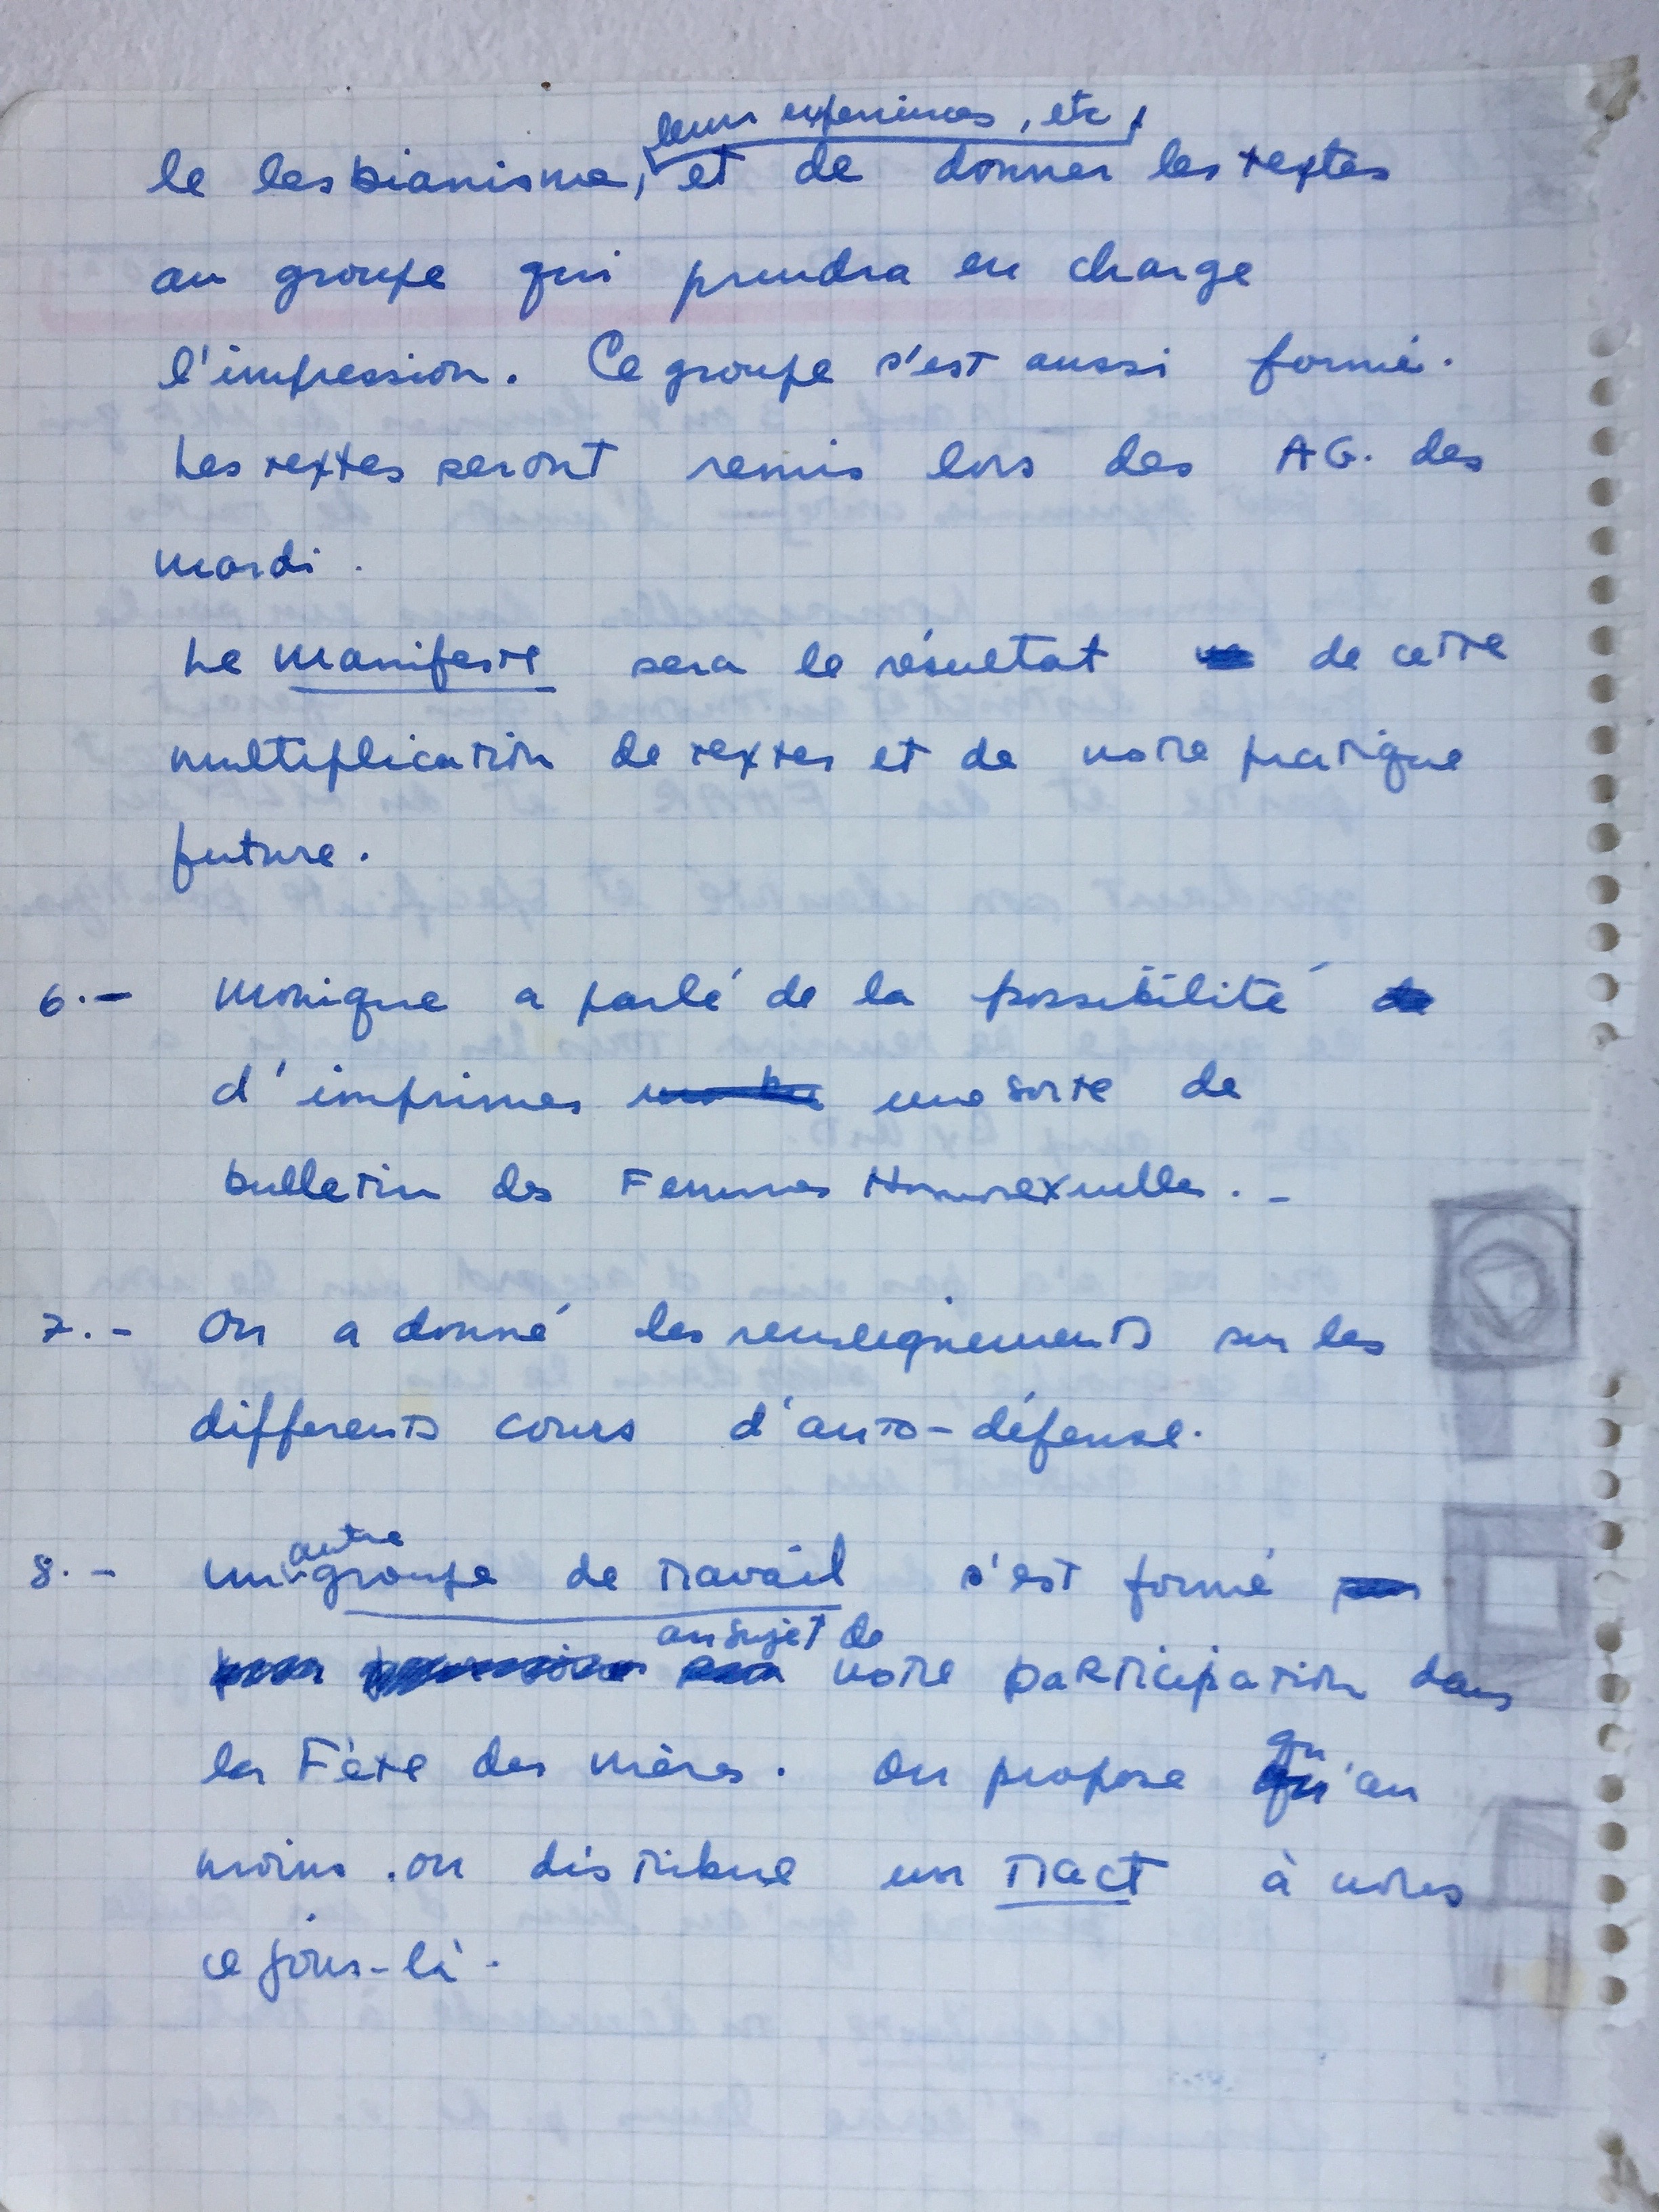 notes from activist meetings in Paris in the Seventies